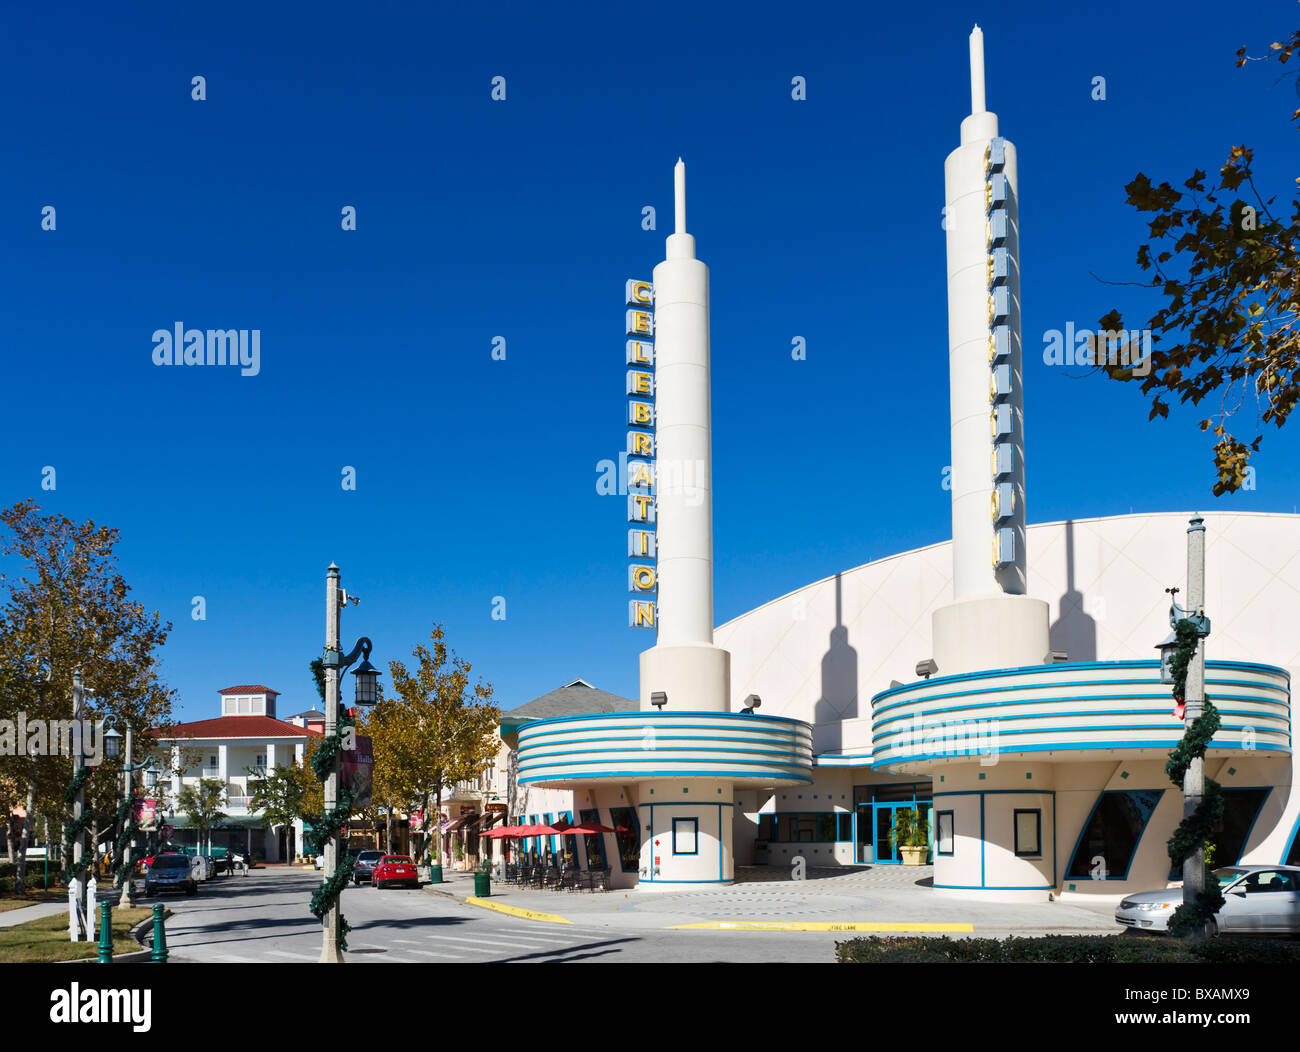 Movie theater in the centre of the Disney purpose built township of Celebration, Kissimmee, Orlando, Central Florida, USA Stock Photo